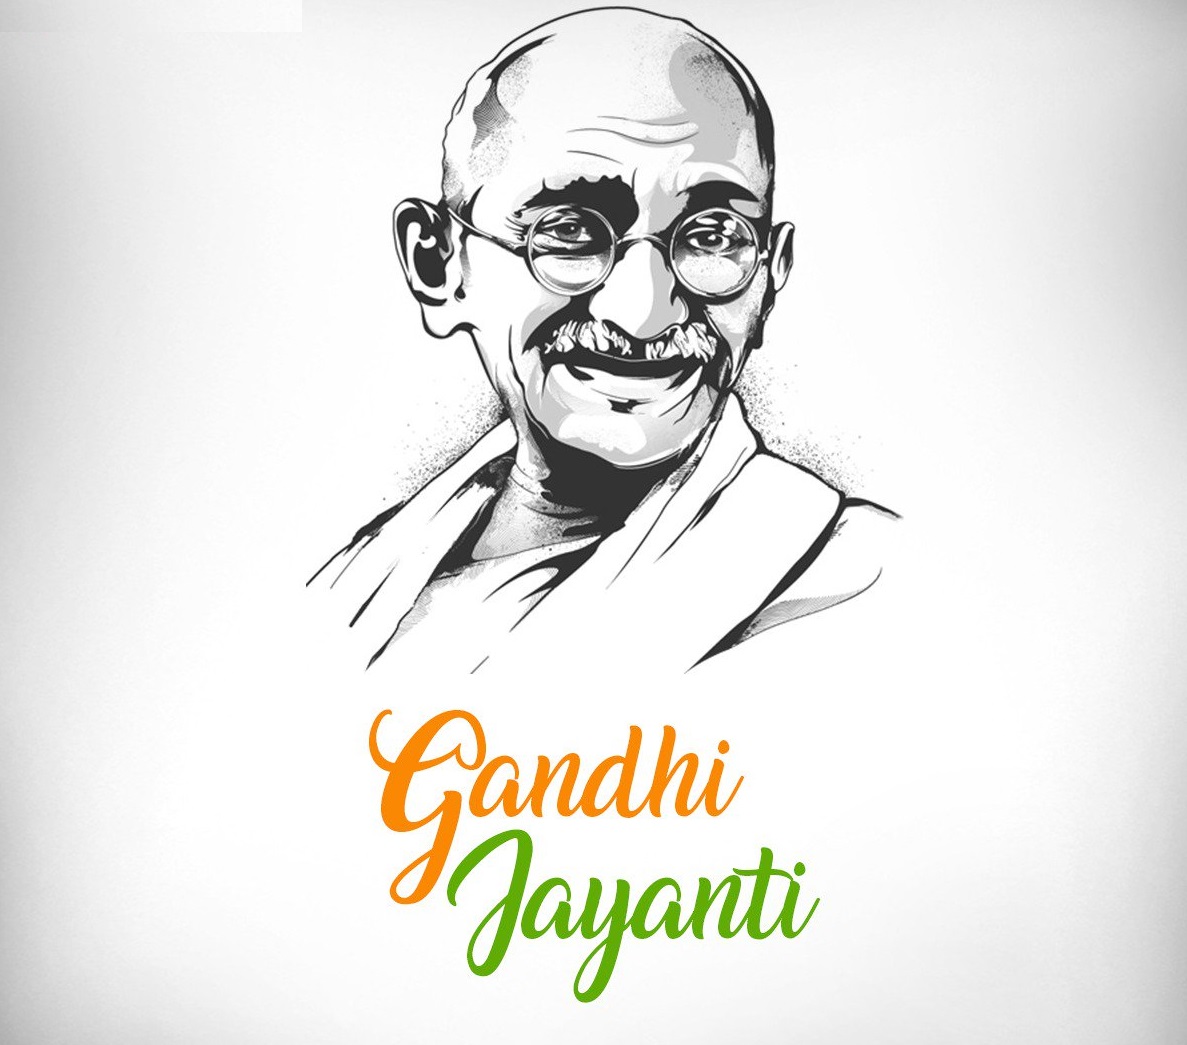 Colorful Poster or Card Design for the Gandhi Jayanti Holiday Celebration  in India on the 2nd October with a Drawing Stock Vector - Illustration of  colorful, india: 157114413